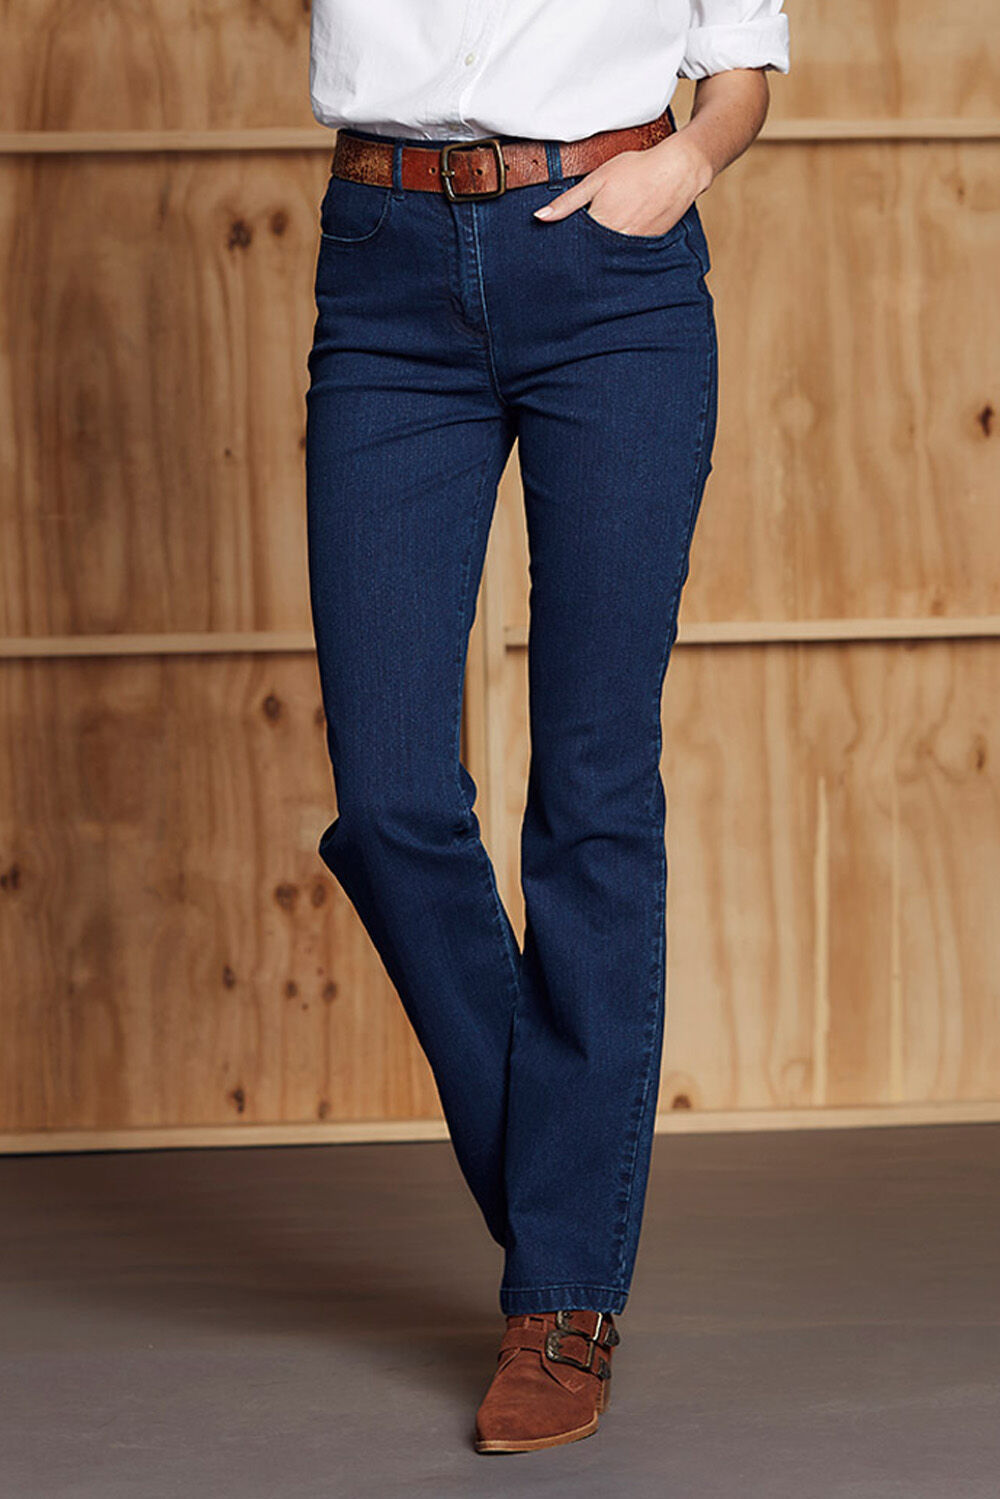 Jeans for Women | Ladies' Jeans | Home 